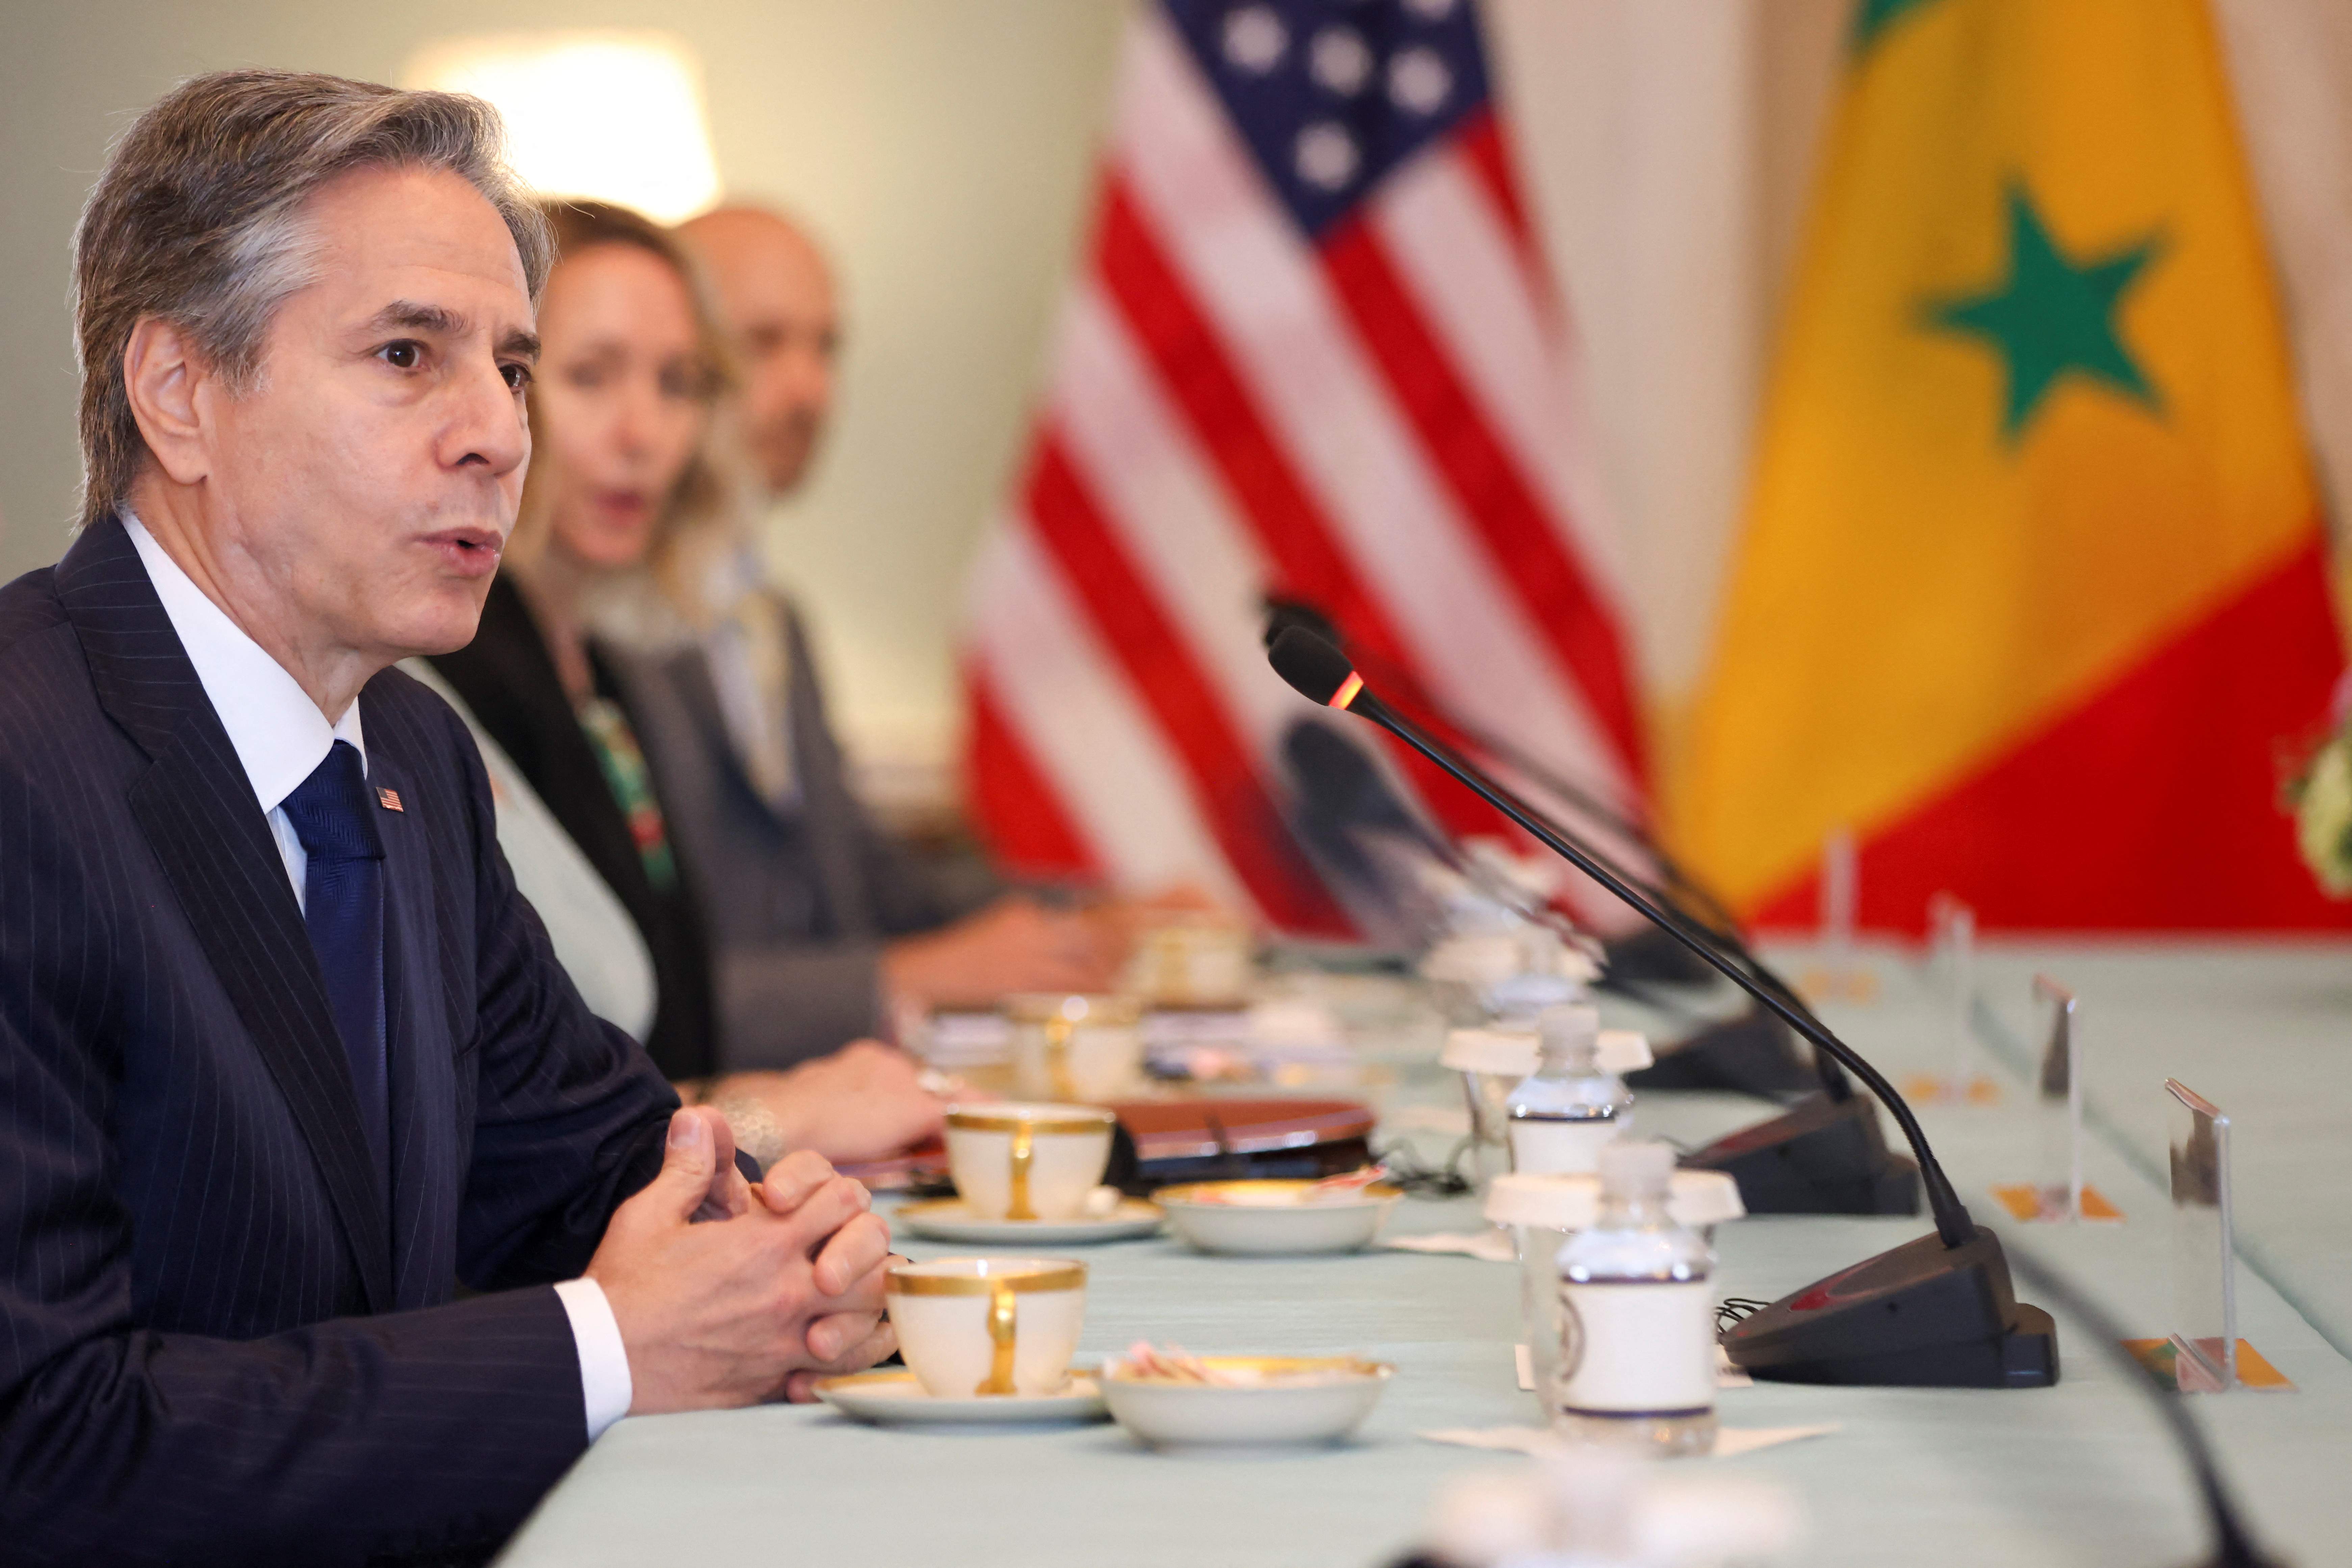 U.S. Secretary of State Blinken meets with Senegal's Foreign Minister Tall Sall in Washington